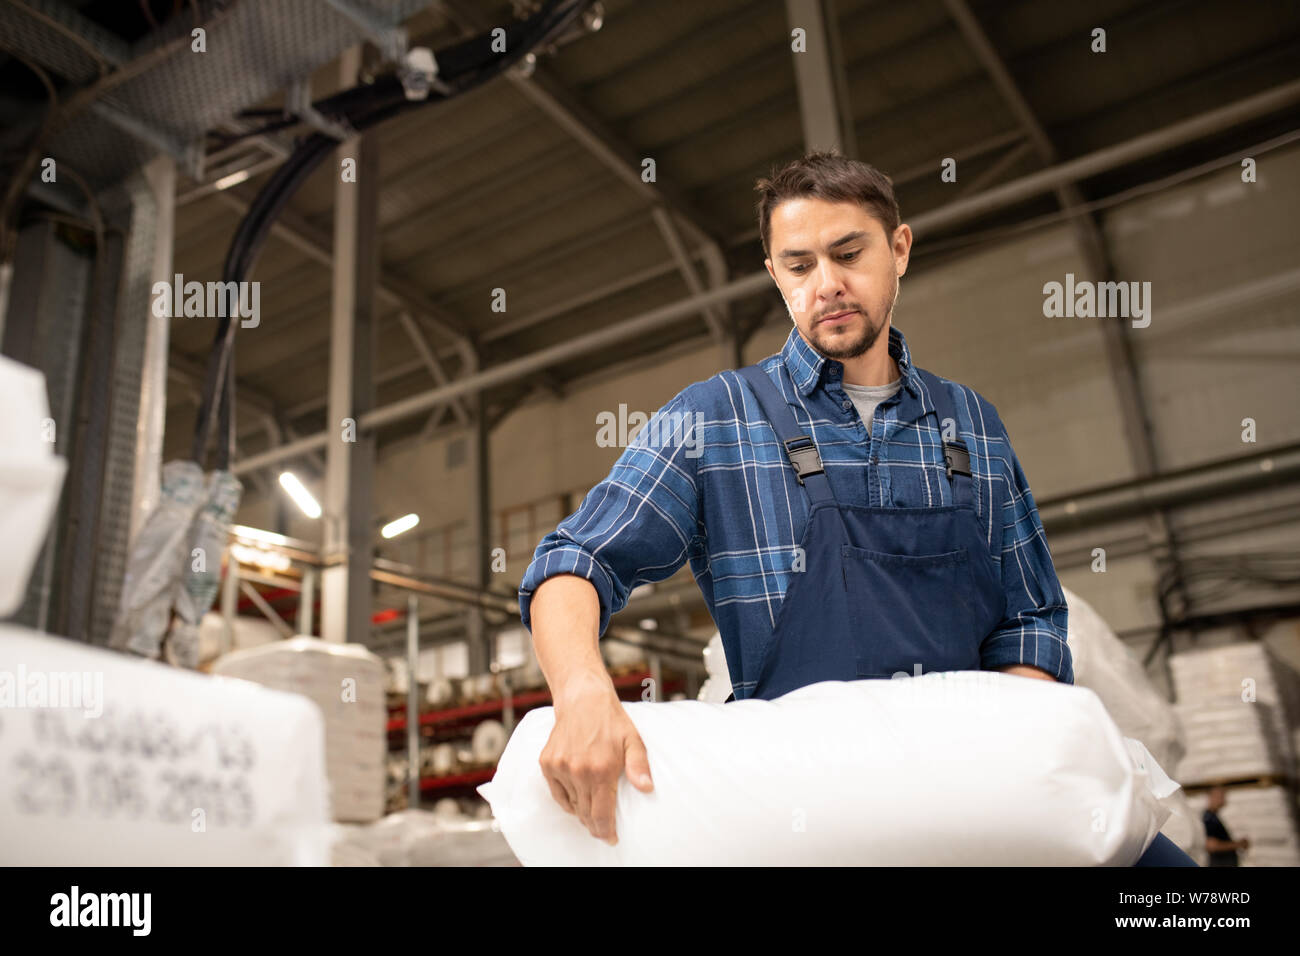 Young male worker of large polymer production factory loading sacks Stock Photo